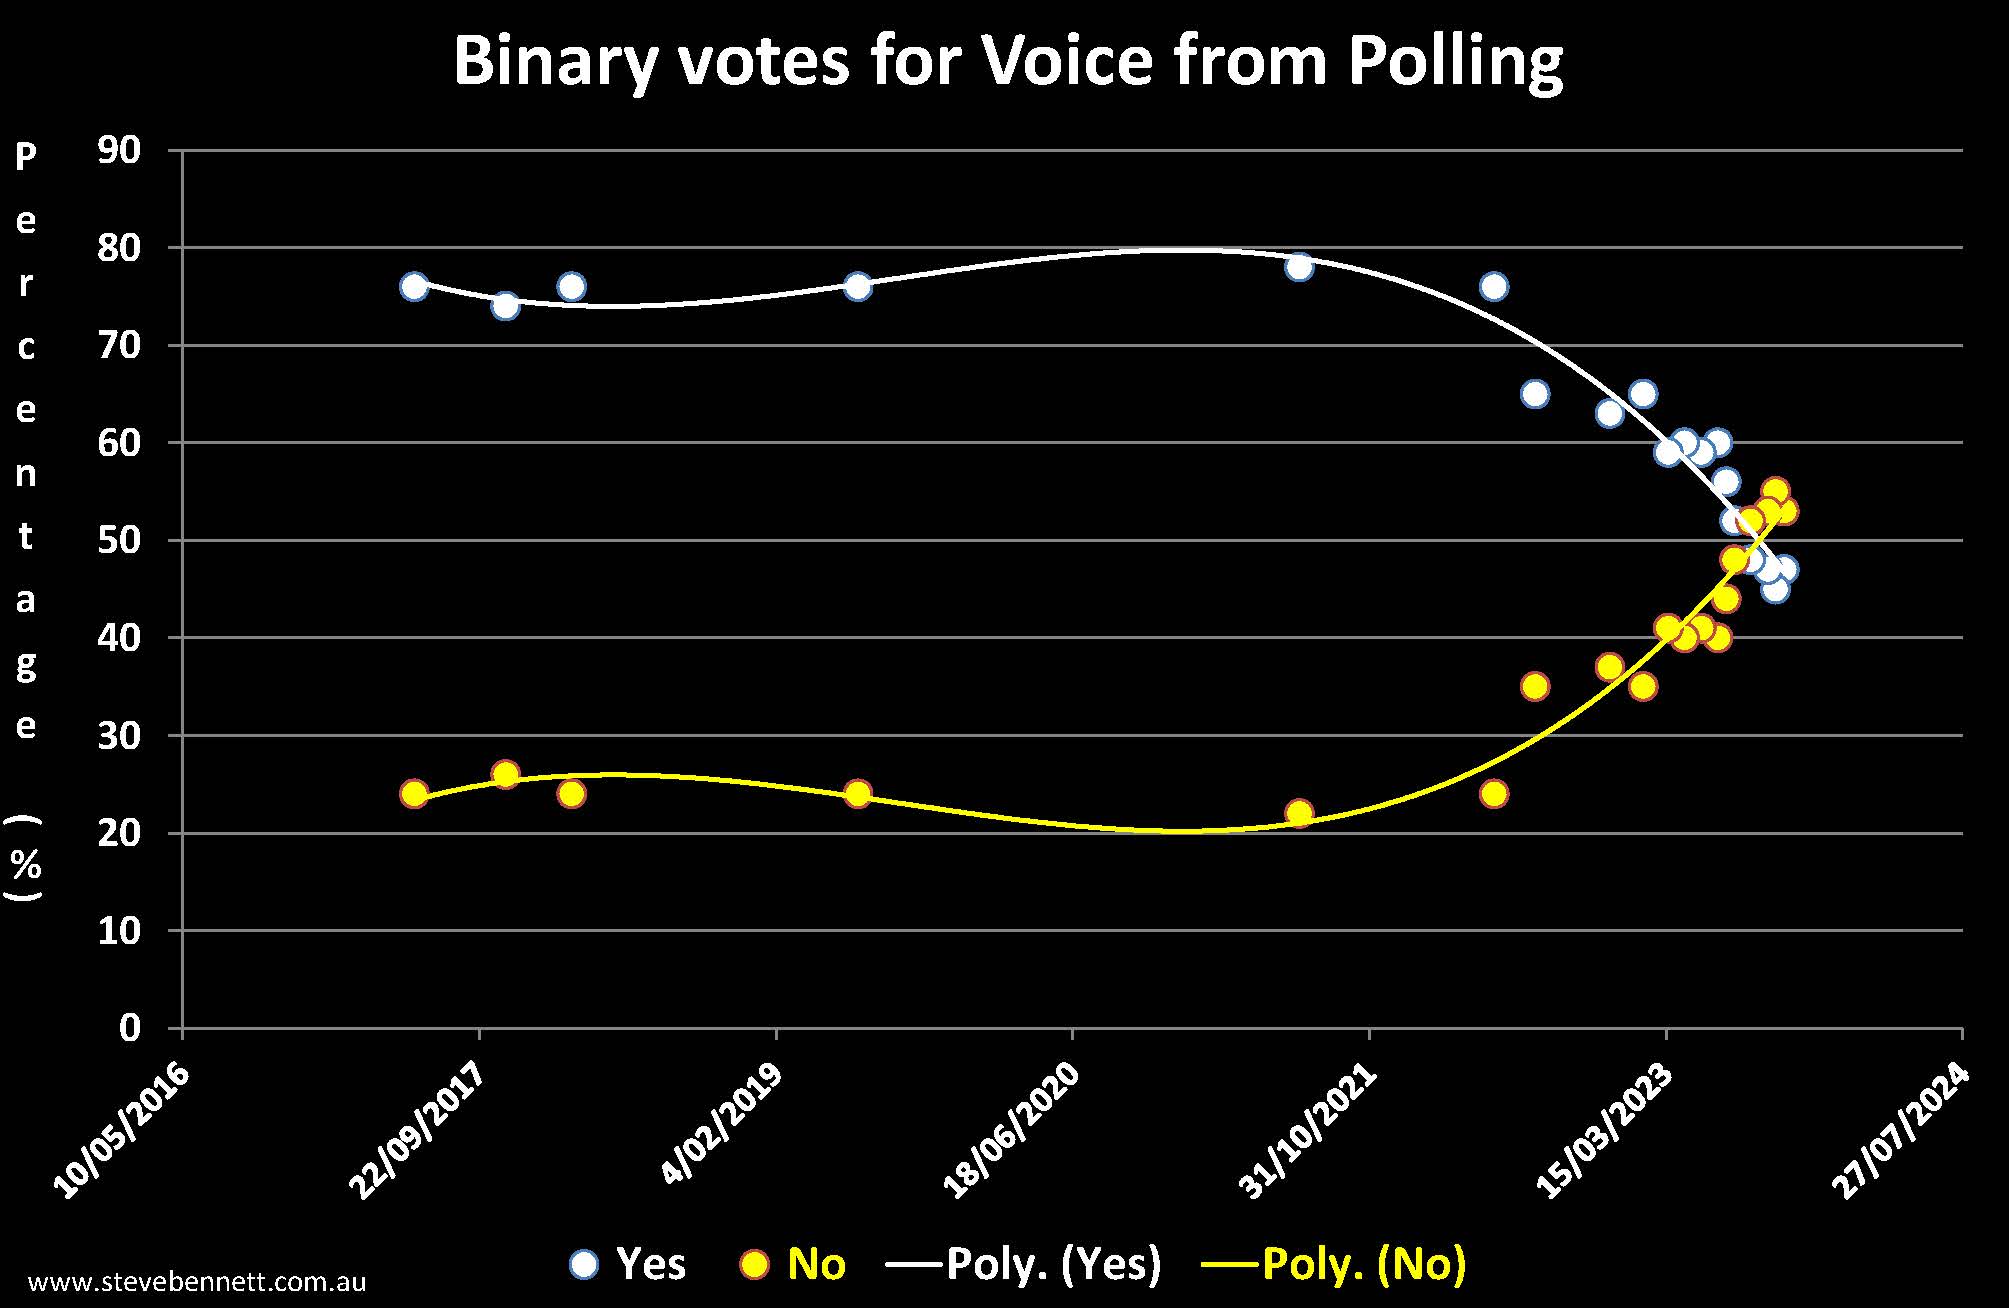 Chart showing Yes and No binary votes from polling for Voice referendum